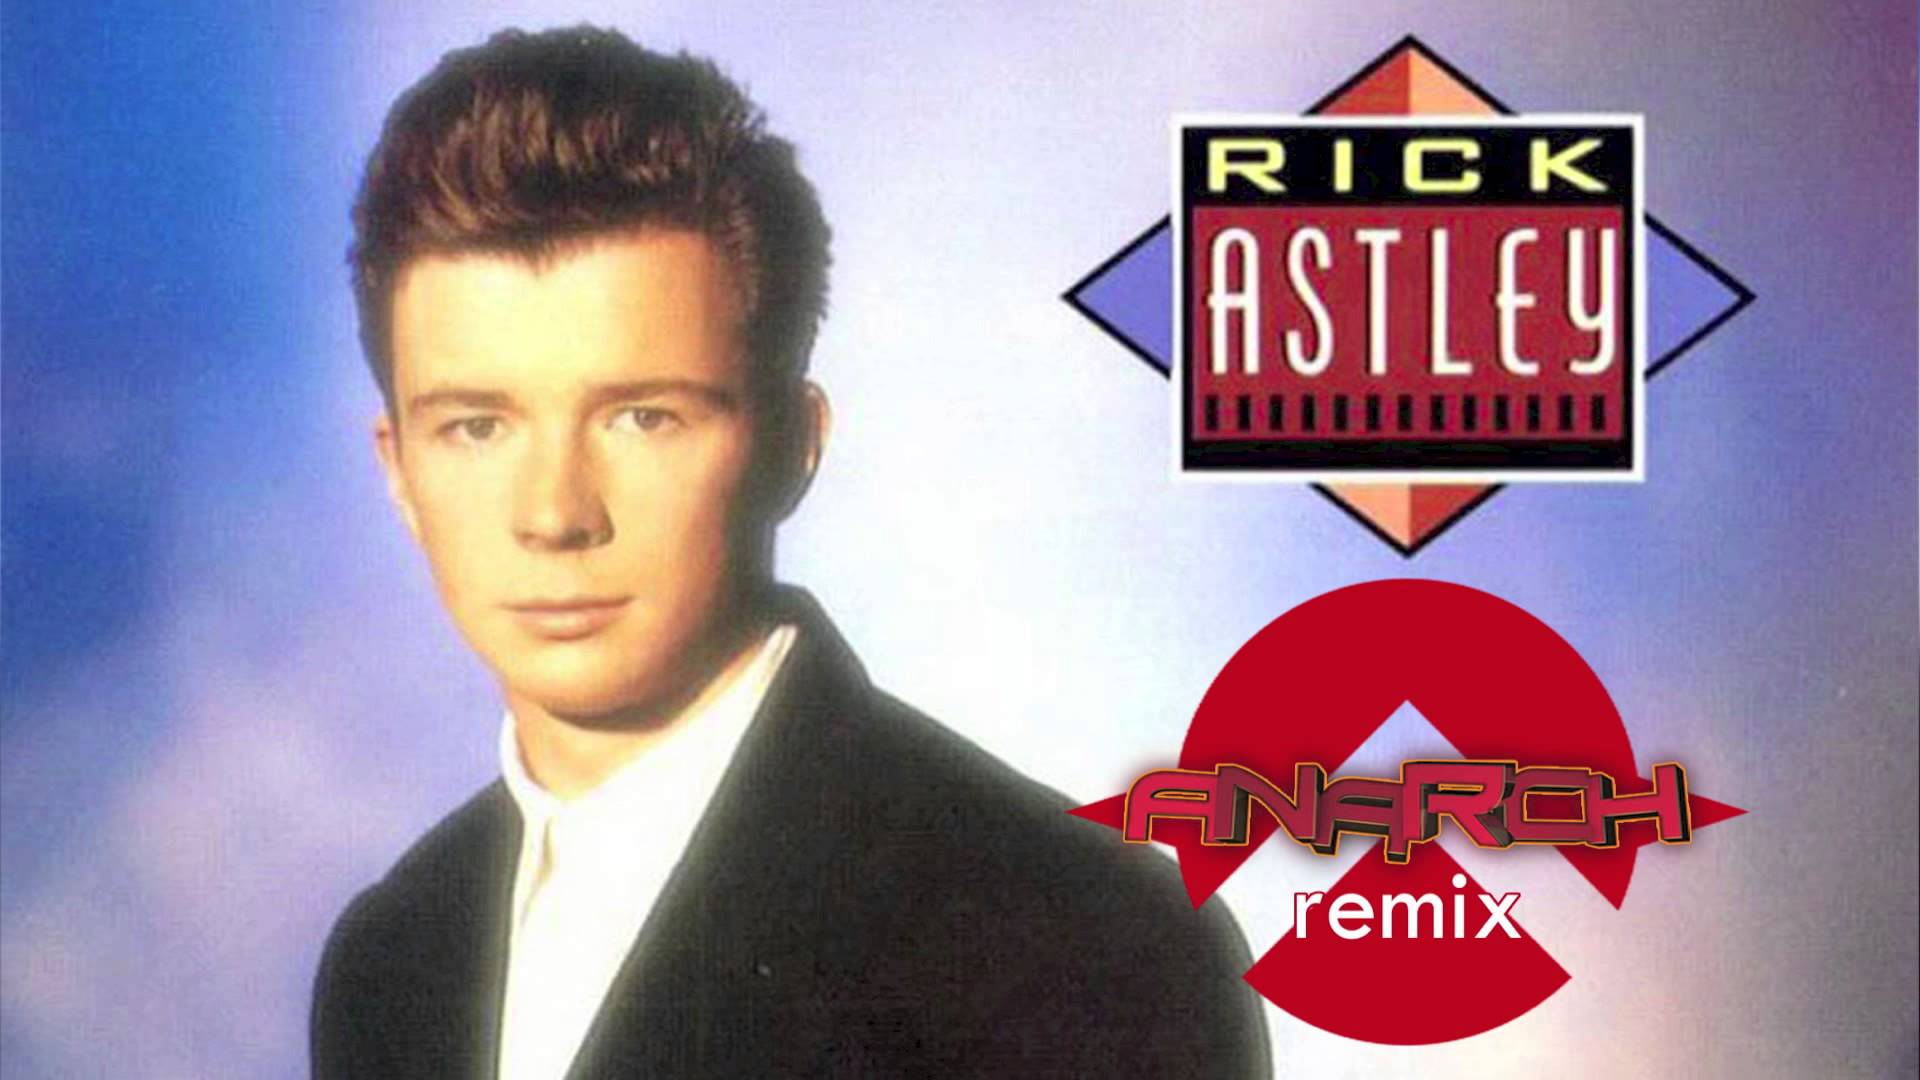 Rick Astley  Never Gonna Give You Up by AxelMetal  Amazfit  Xiaomi Mi  Band 5   AmazFit Zepp Xiaomi Haylou Honor Huawei Watch faces  catalog